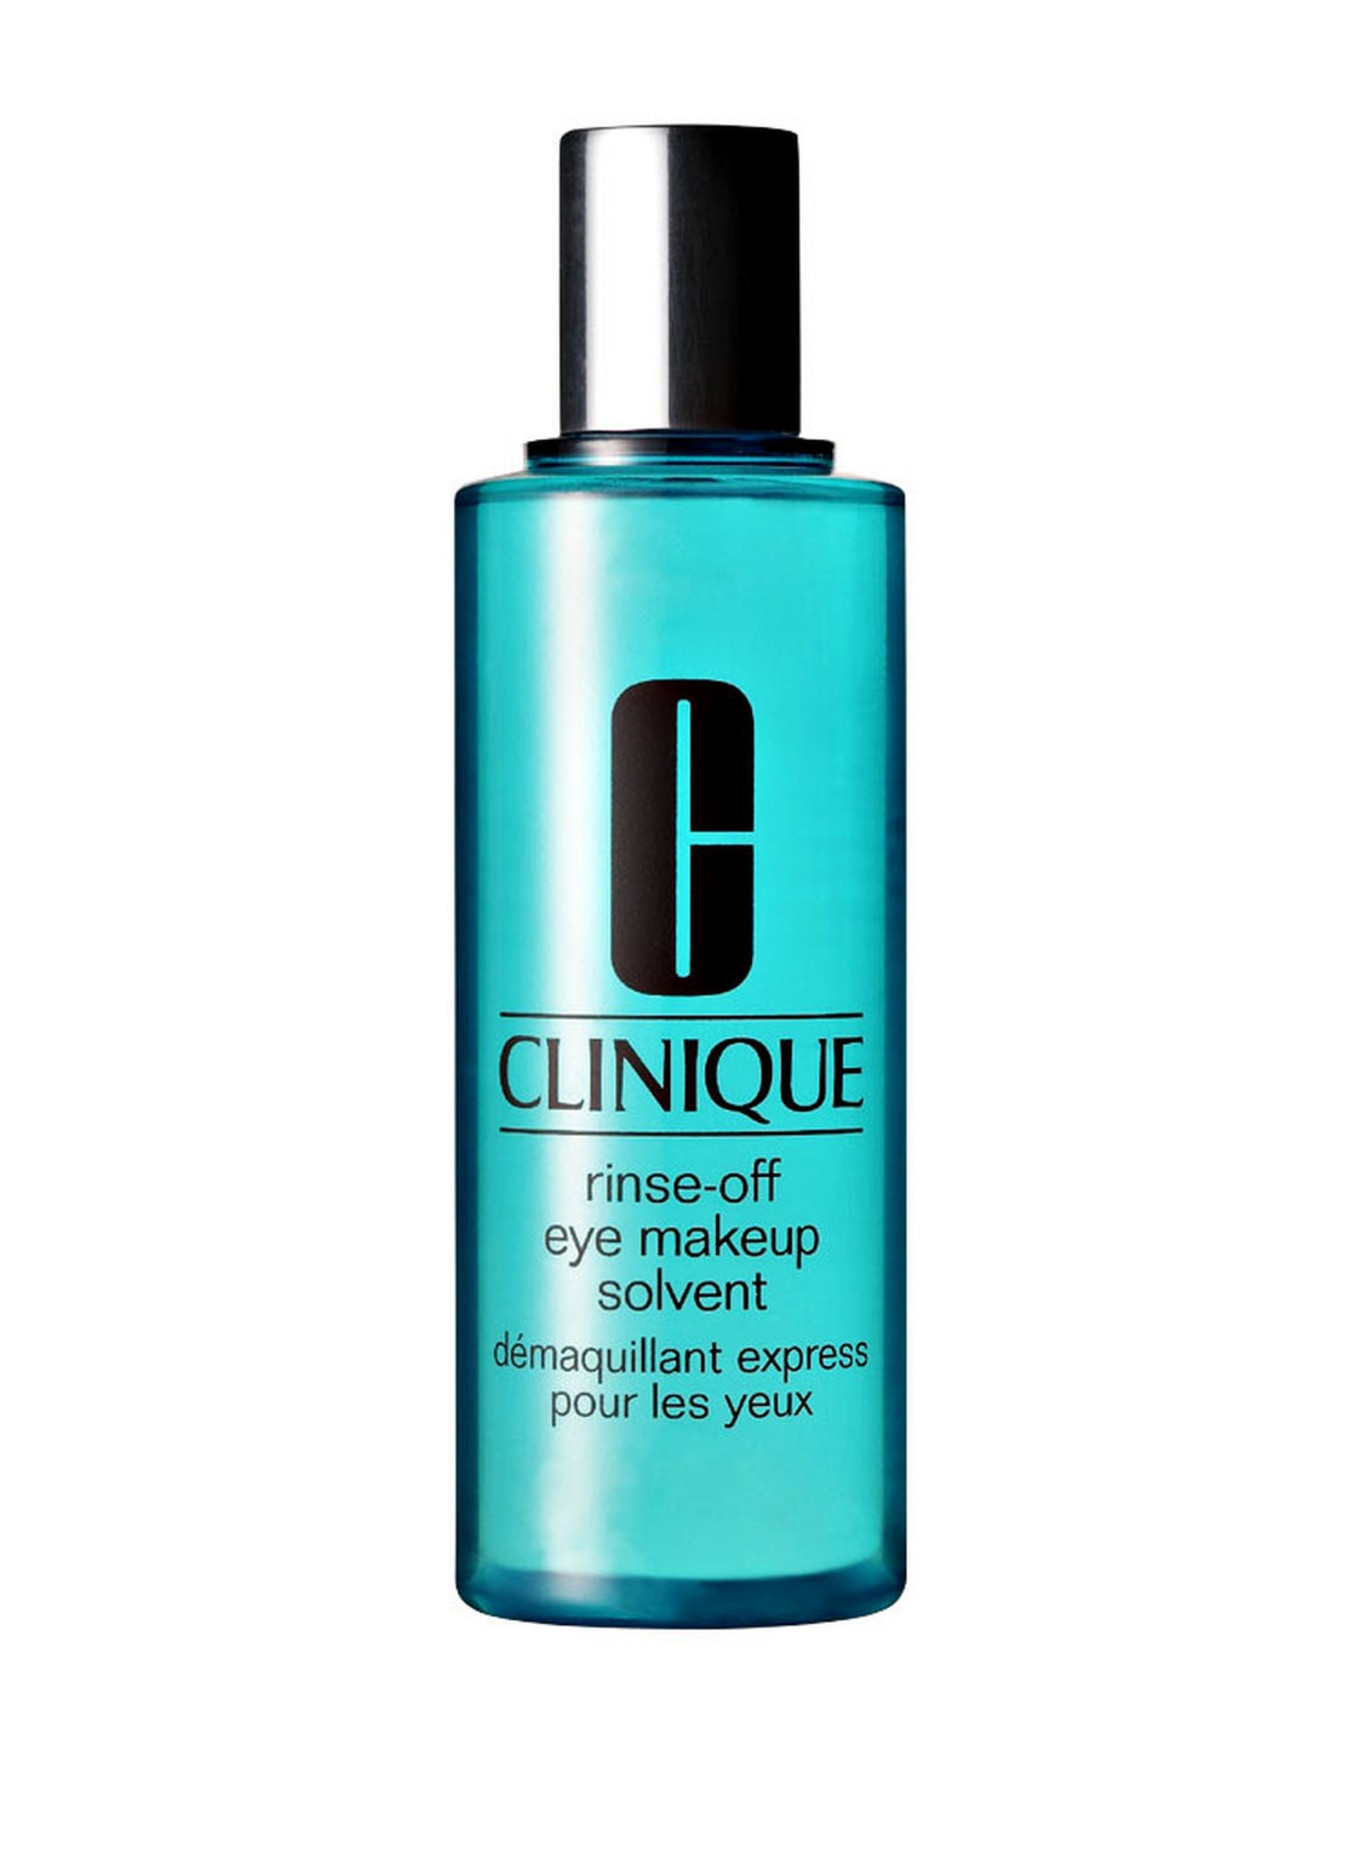 CLINIQUE RINSE-OFF EYE MAKEUP SOLVENT(Bild null)